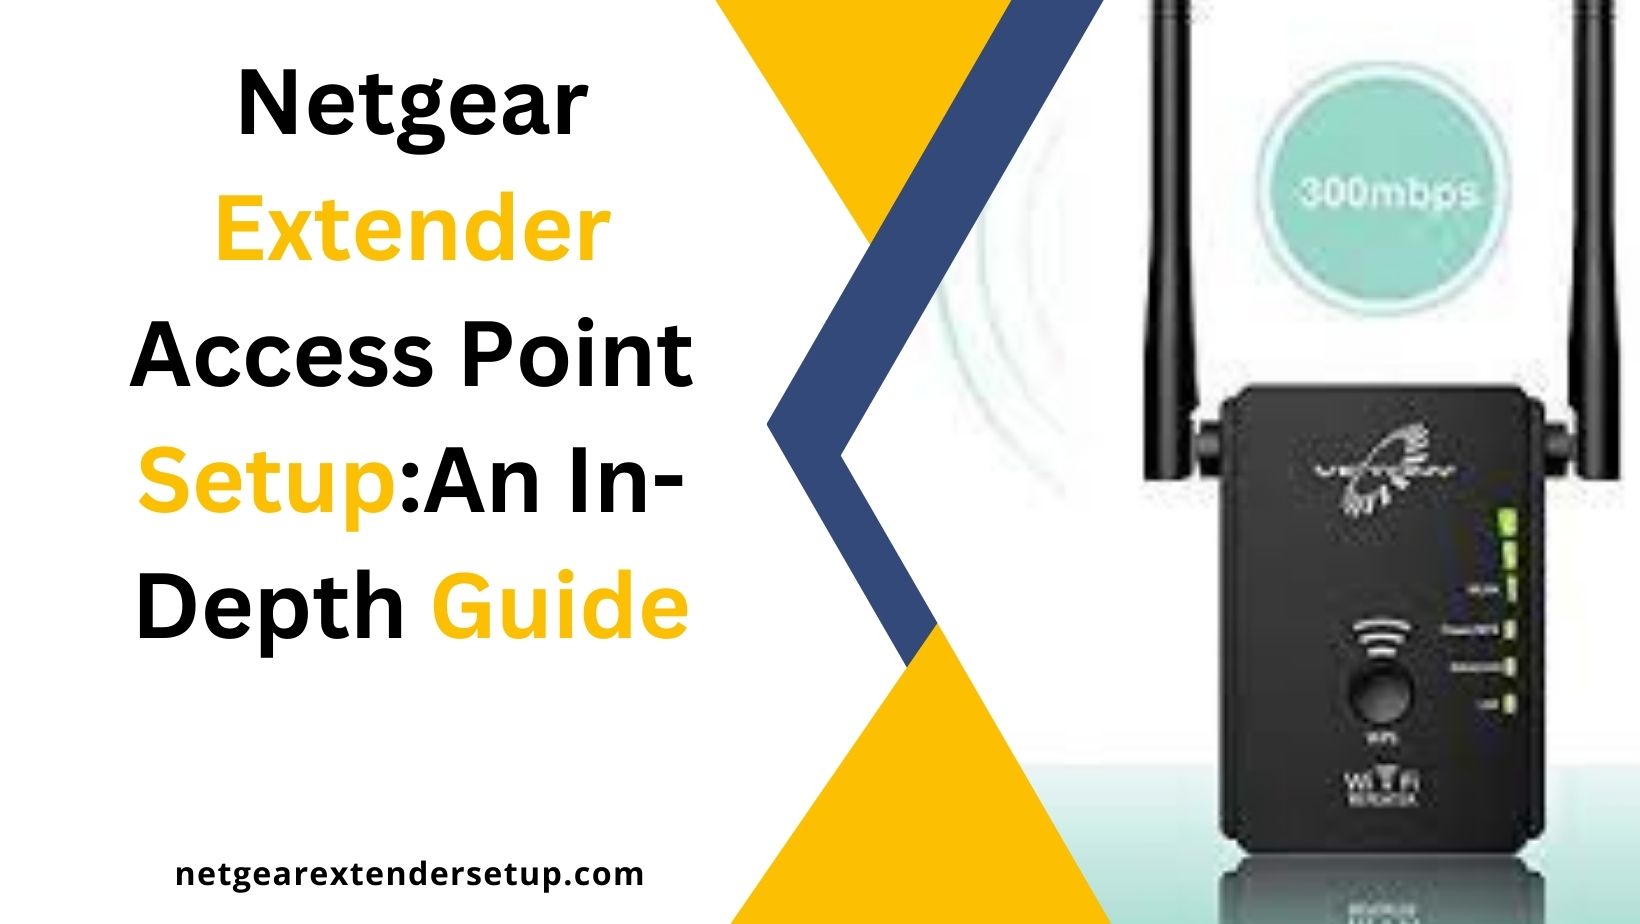 You are currently viewing Netgear Extender Access Point Setup: An In-Depth Guide